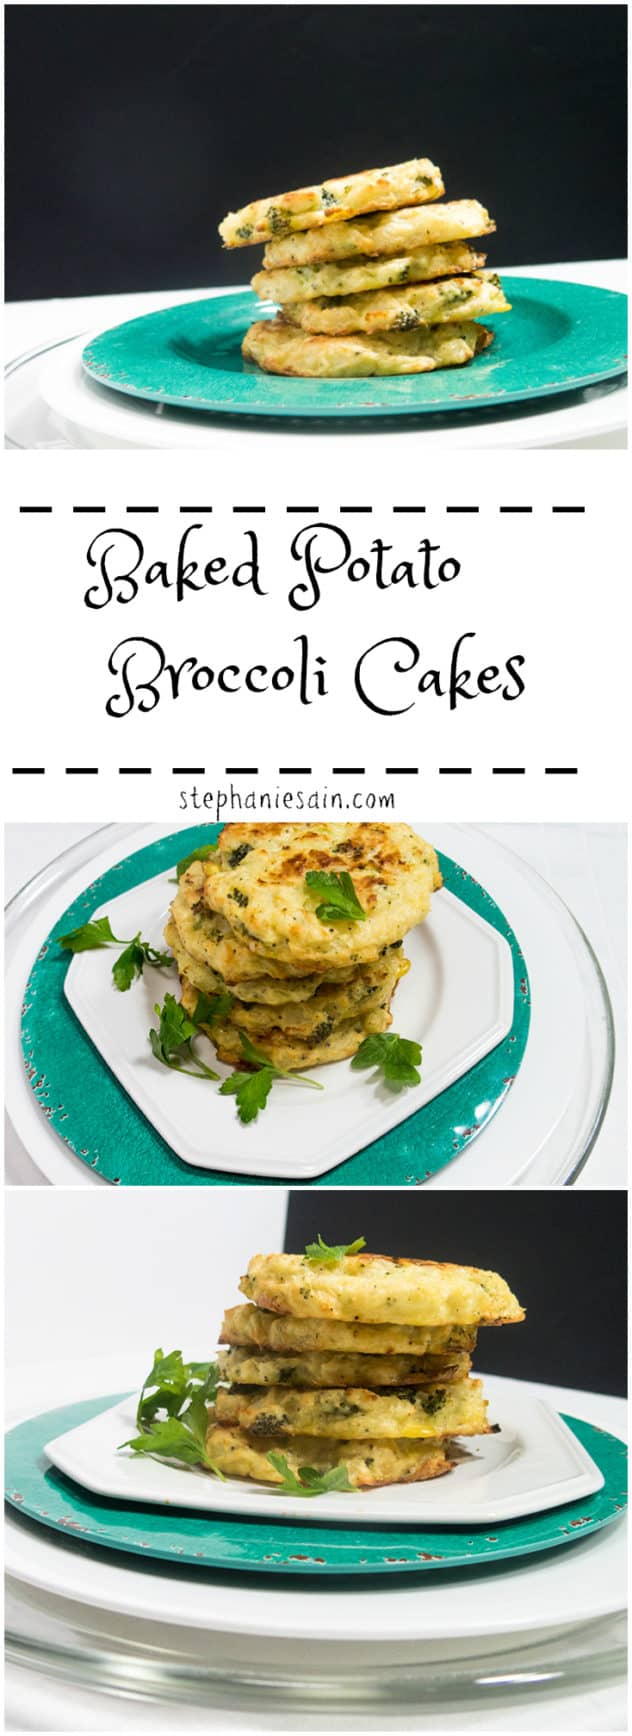 Baked Potato Broccoli Cakes are at tasty, healthy, easy to prepare patty made with leftover potatoes. Vegetarian and Gluten Free.